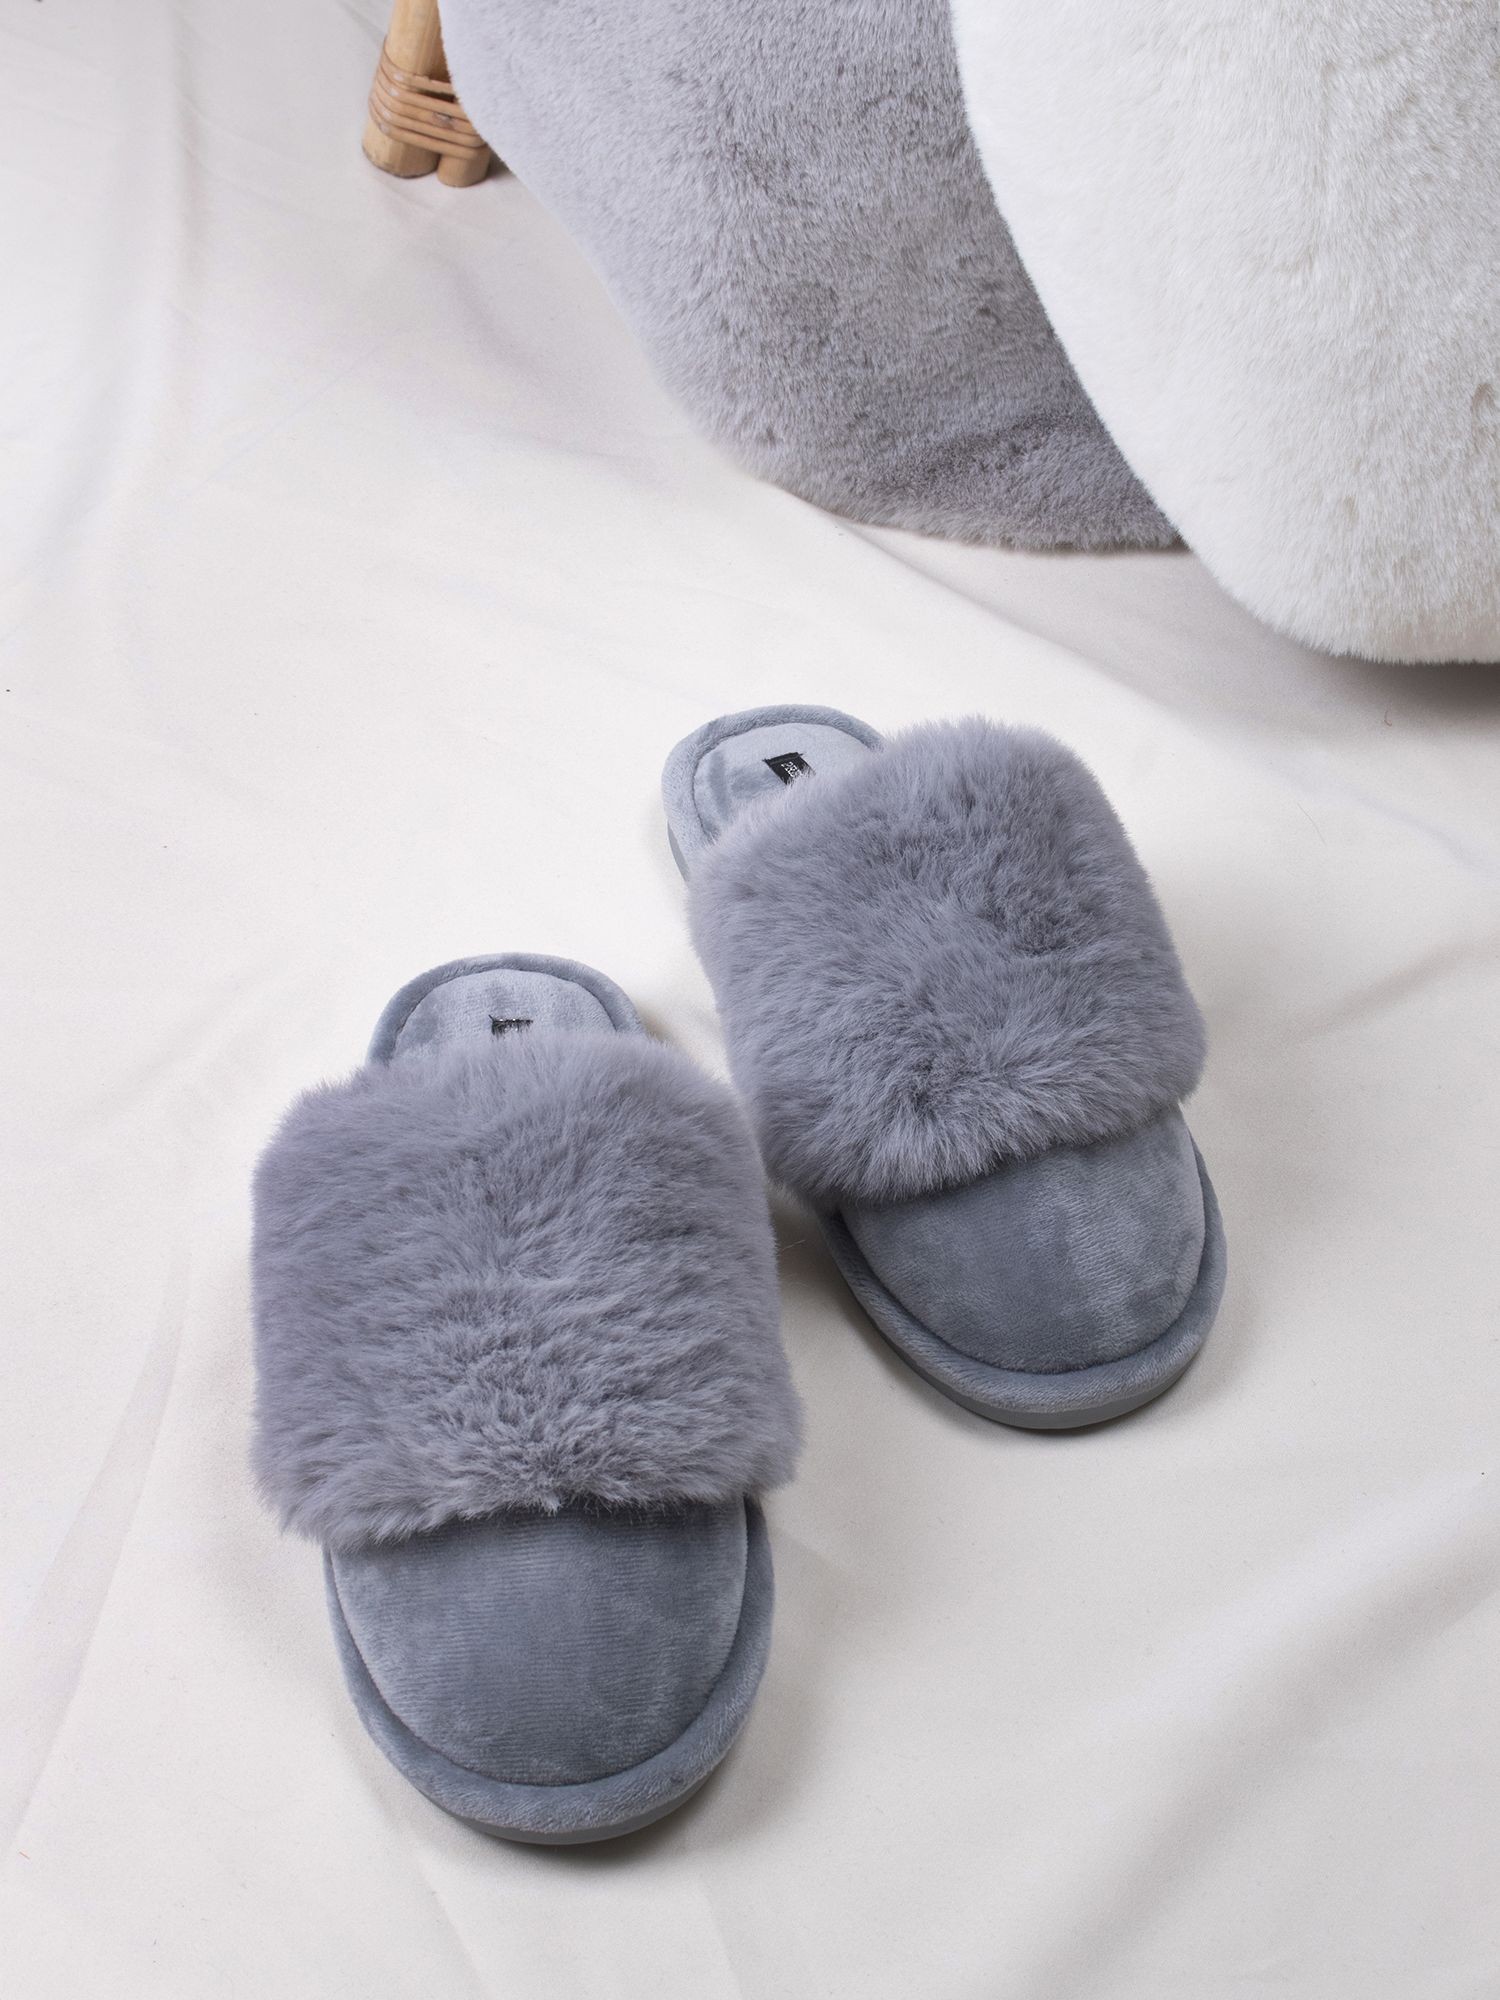 Buy Pretty You London Danni Slippers Online at johnlewis.com